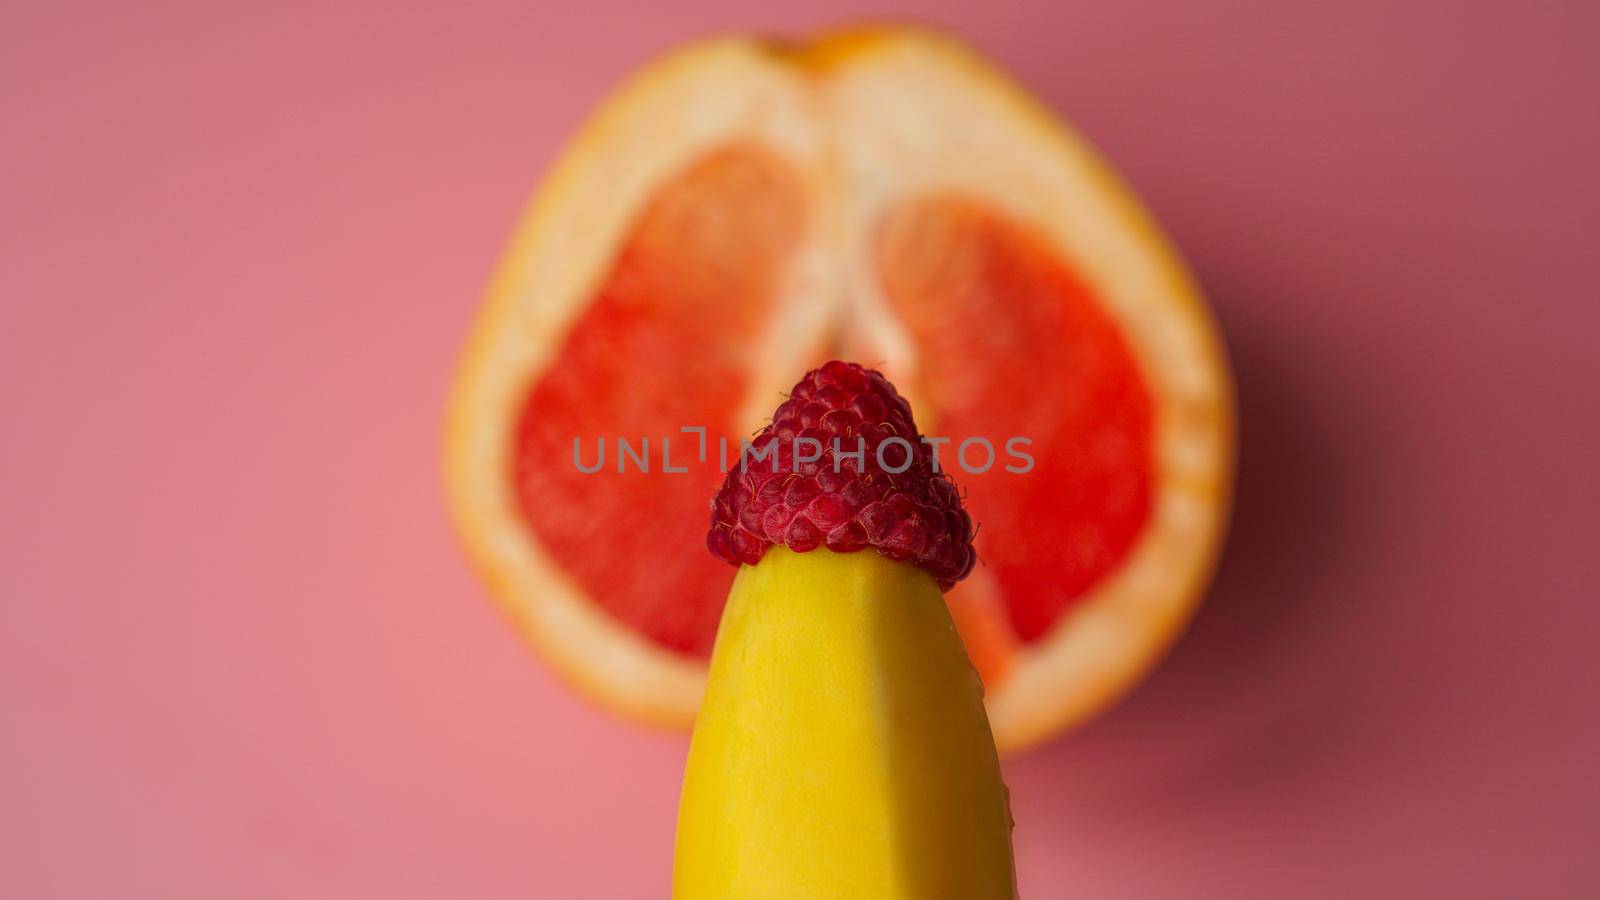 Banana with red grapefruit and raspberries on pink background, sex concept